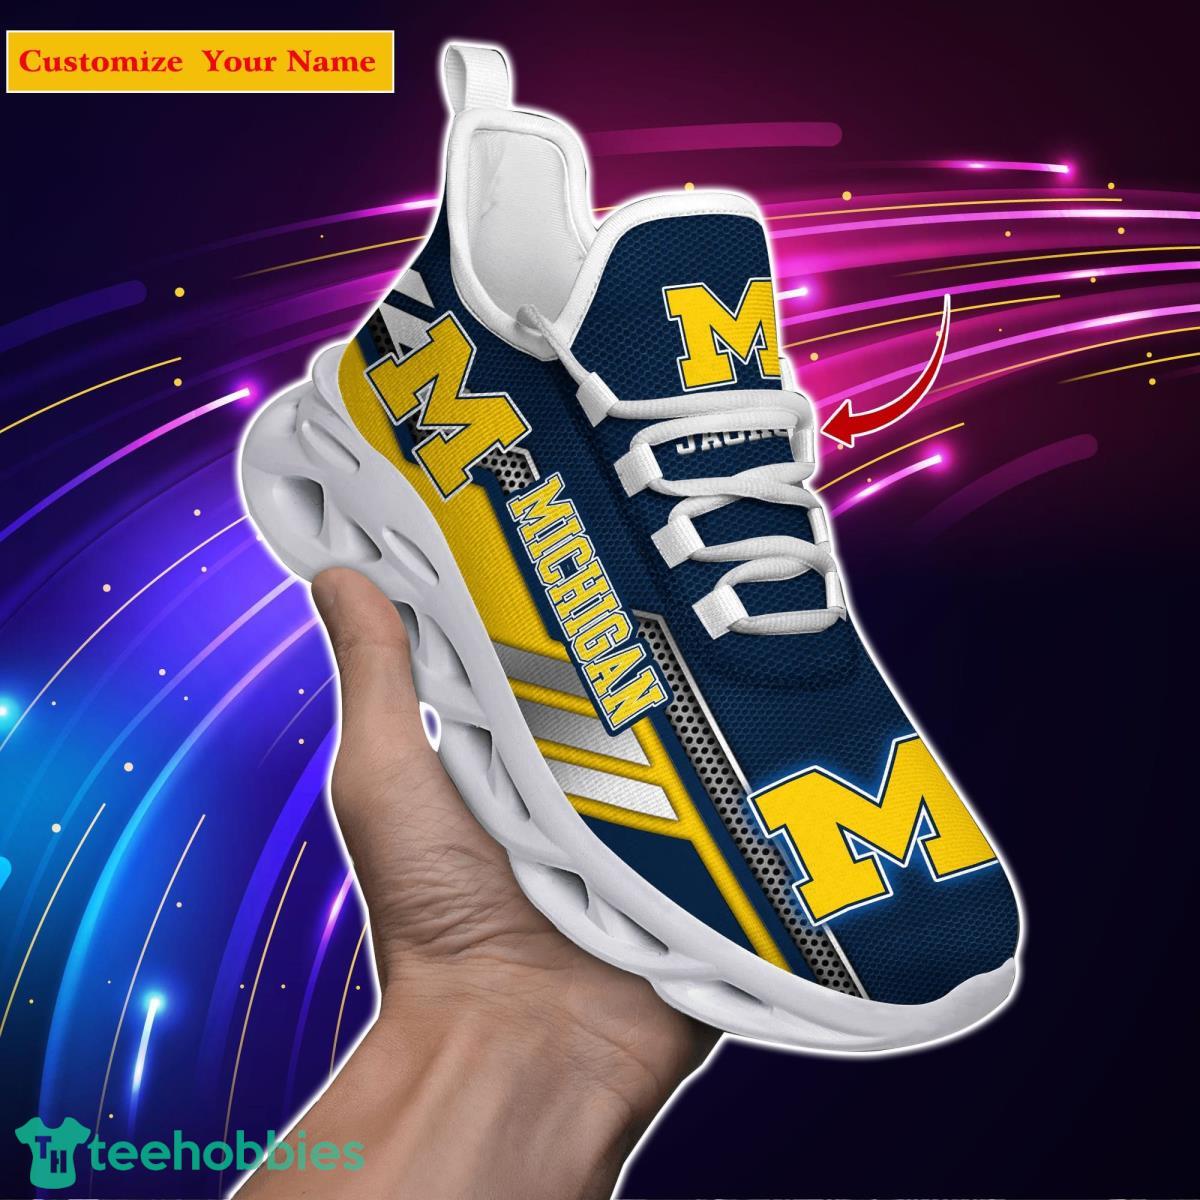 Michigan Wolverines NCAA2 Custom Name Max Soul Shoes Bet Gift For Men Women Fans Product Photo 1